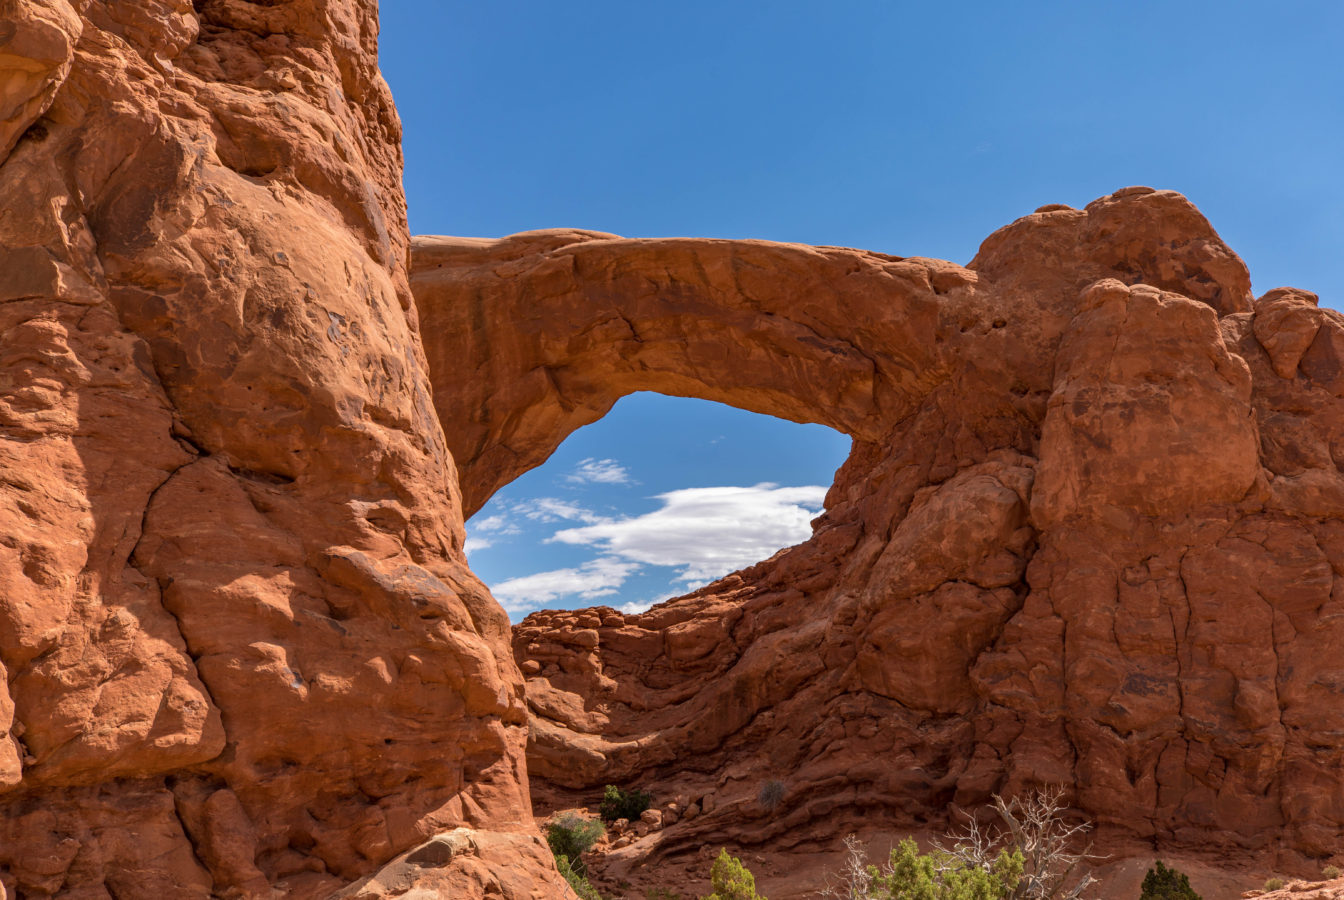 Up close with Turret Arch